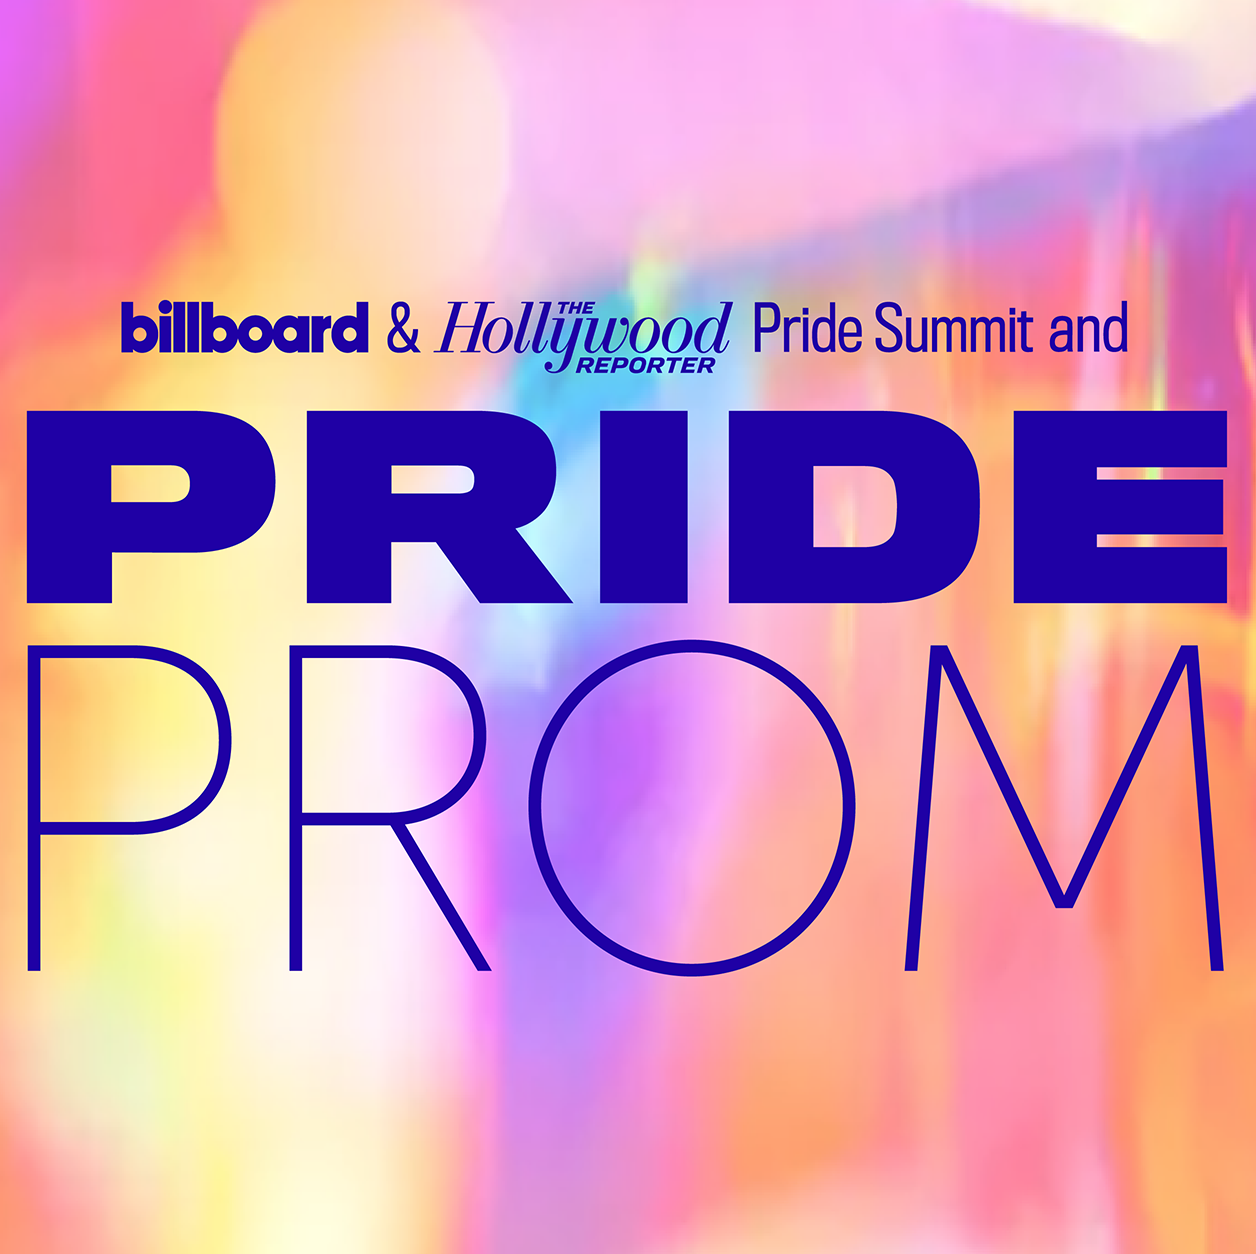 WATCH Billboard & The Hollywood Reporter's Pride Summit & Pride Prom